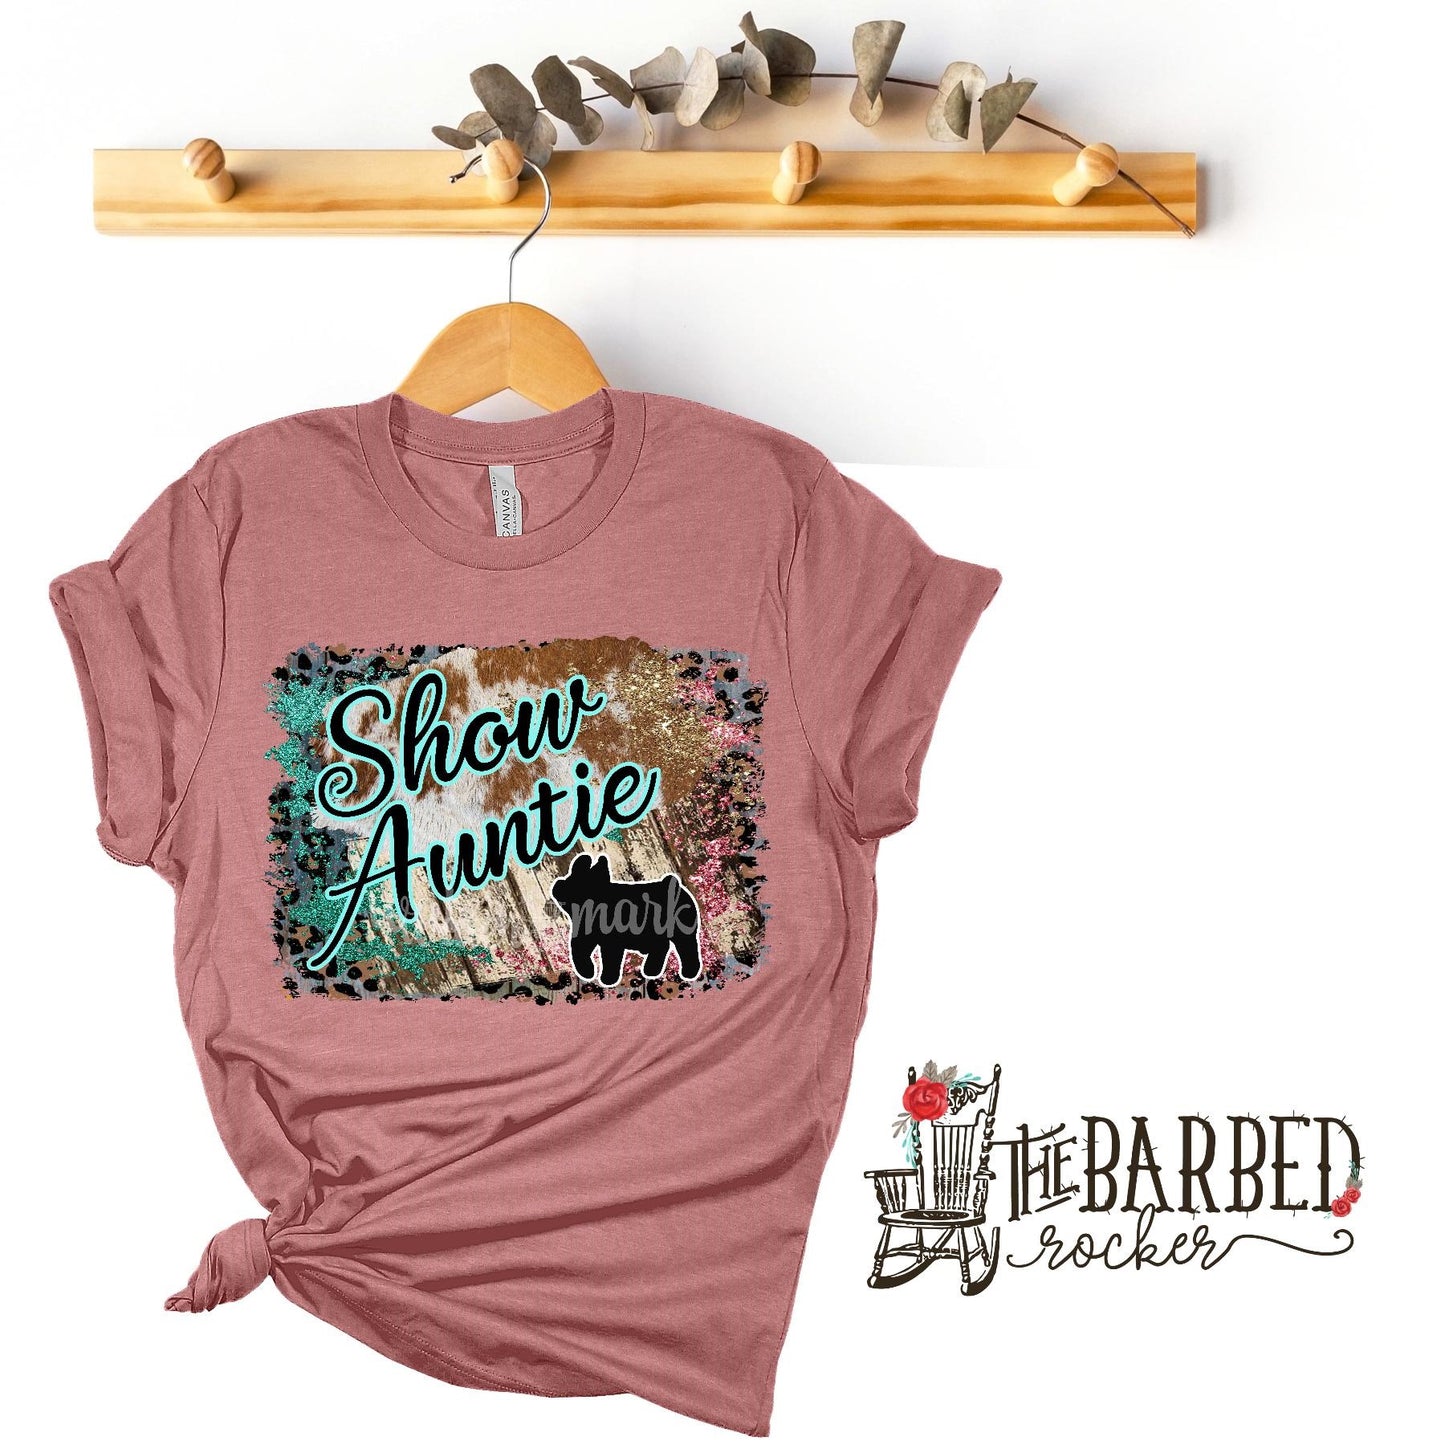 Turquoise and Pink "Show Aunt" Stockshow T-Shirt